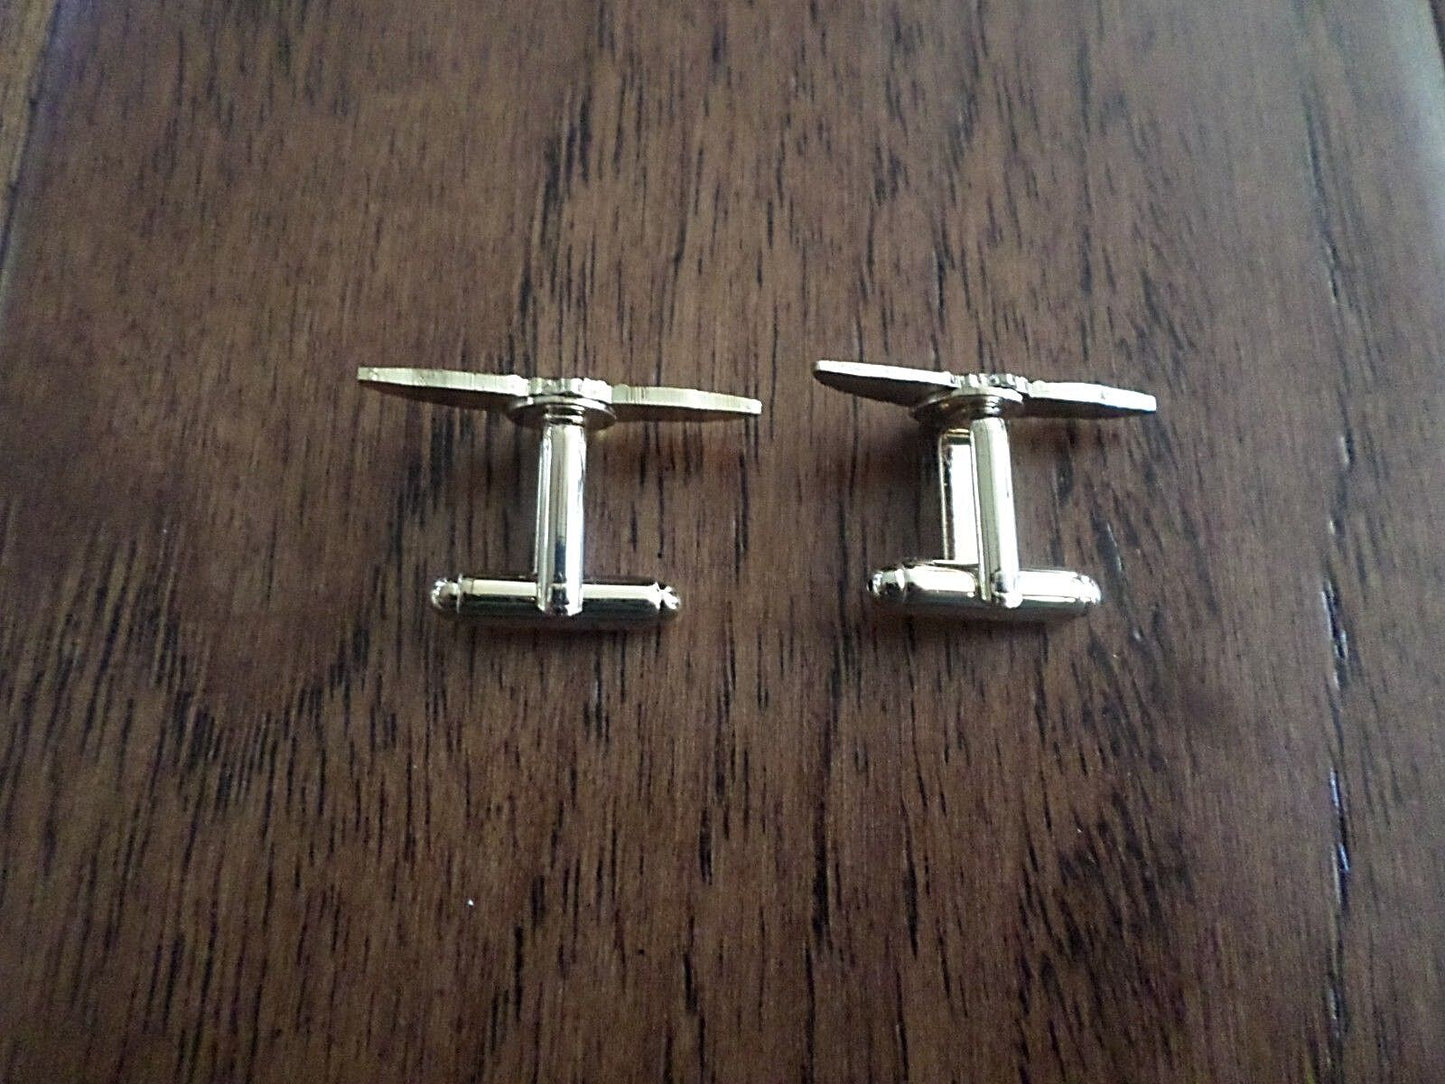 U.S MILITARY NAVY PILOT WINGS CUFFLINKS WITH JEWELRY BOX 1 SET CUFF LINKS BOXED